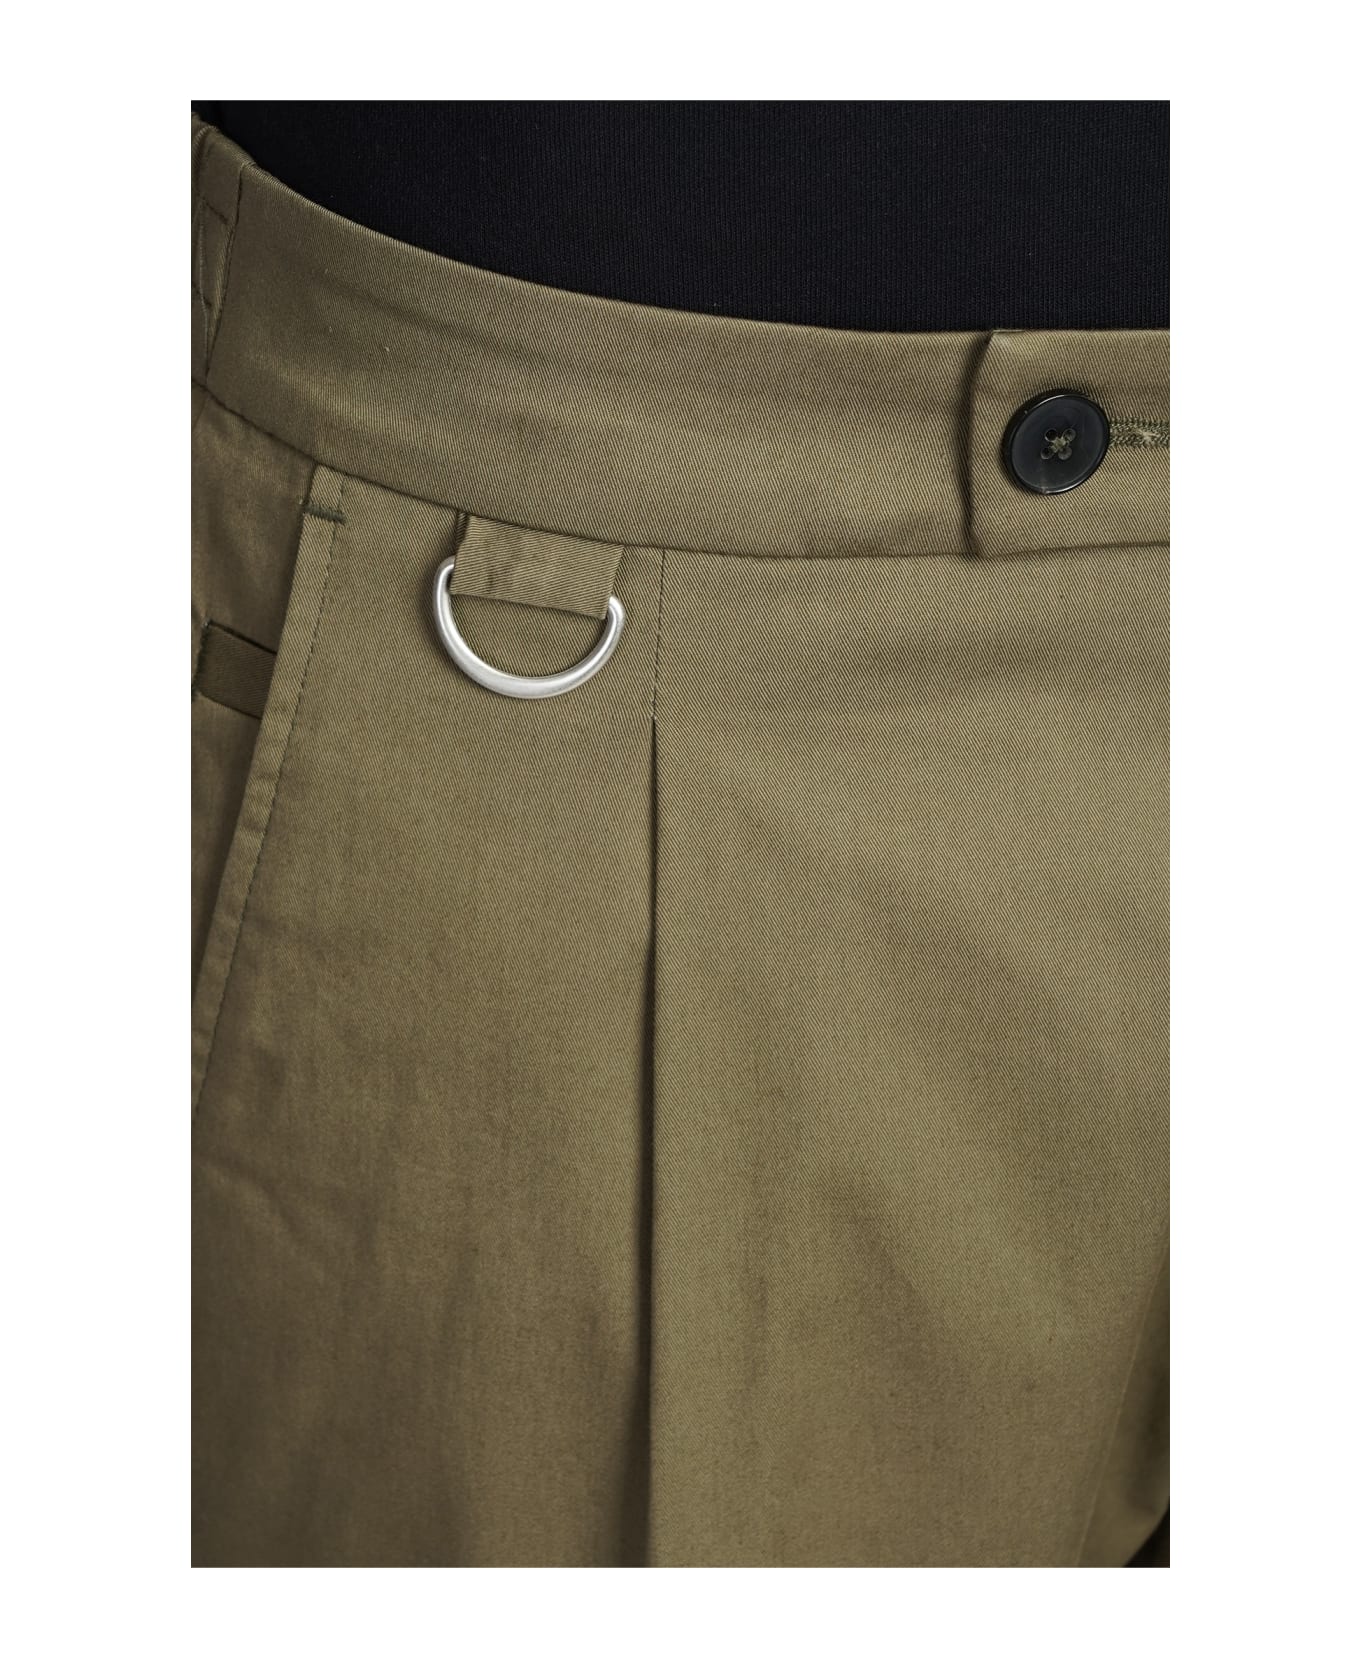 Low Brand Riviera Pants In Green Cotton - green